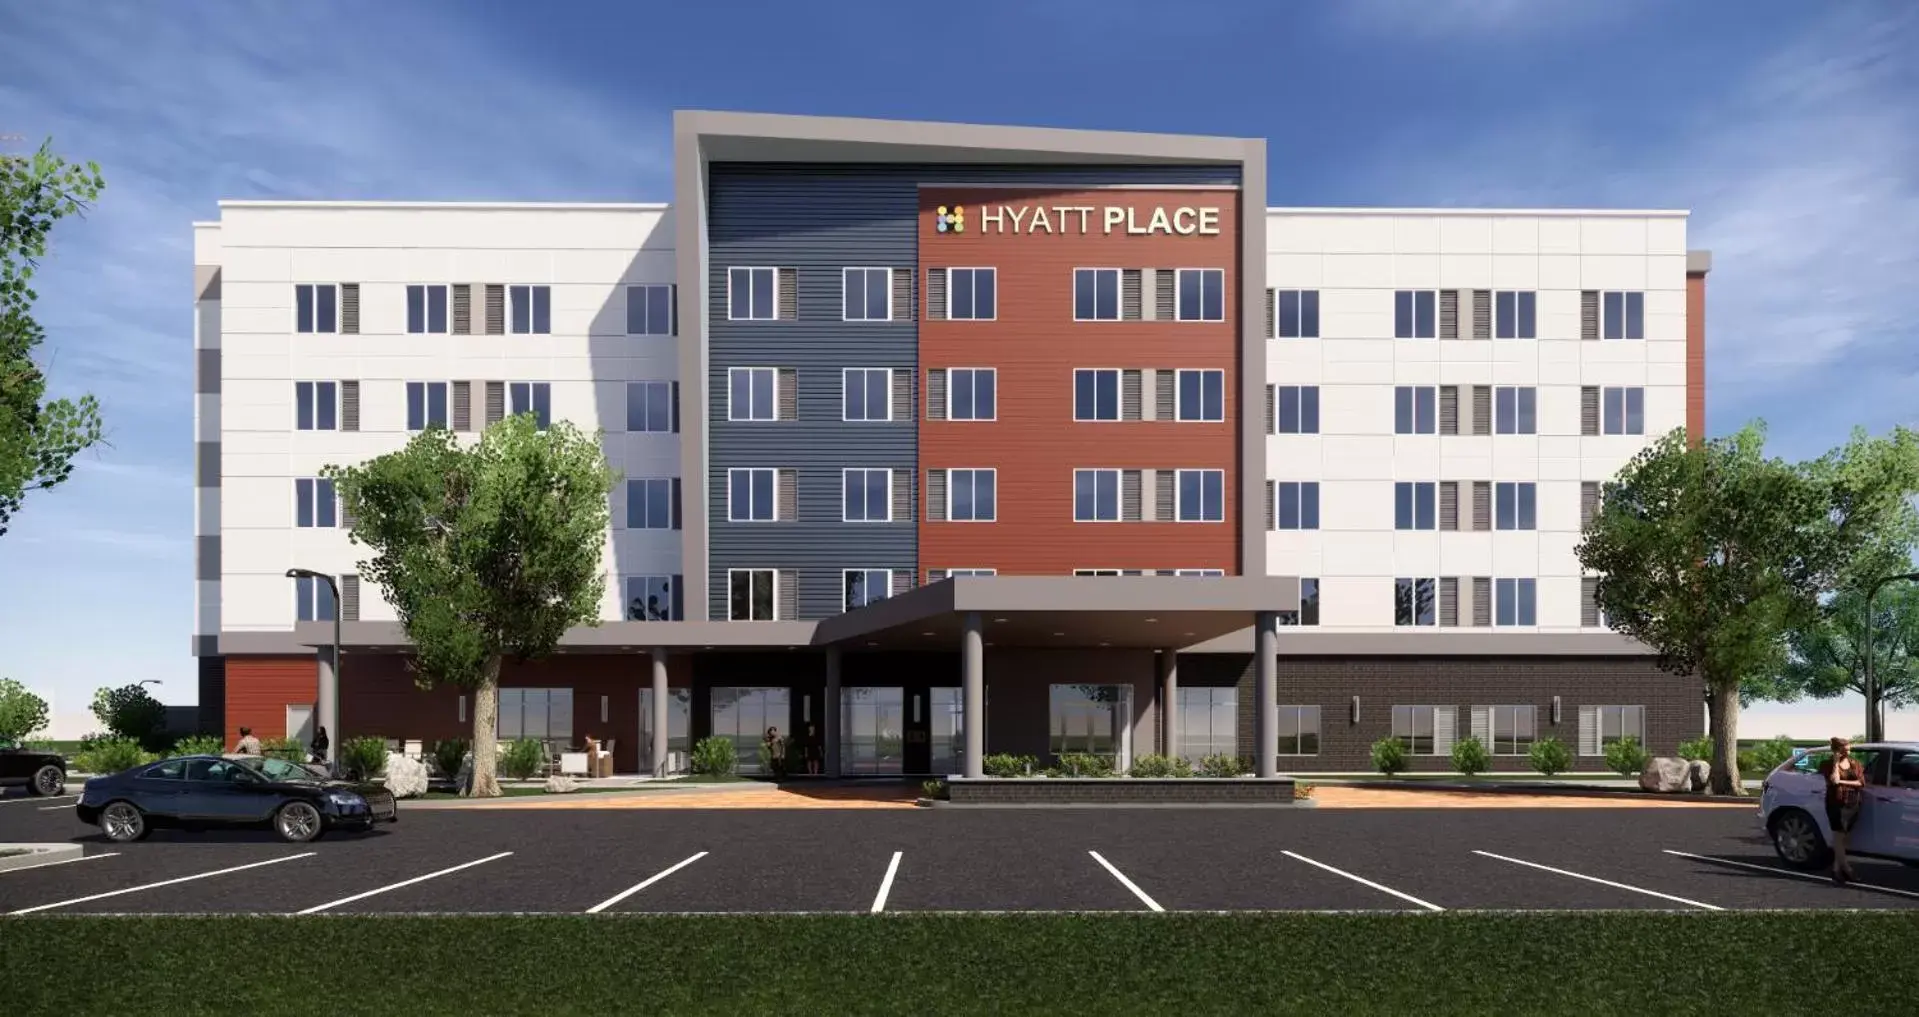 Property Building in Hyatt Place Prince George